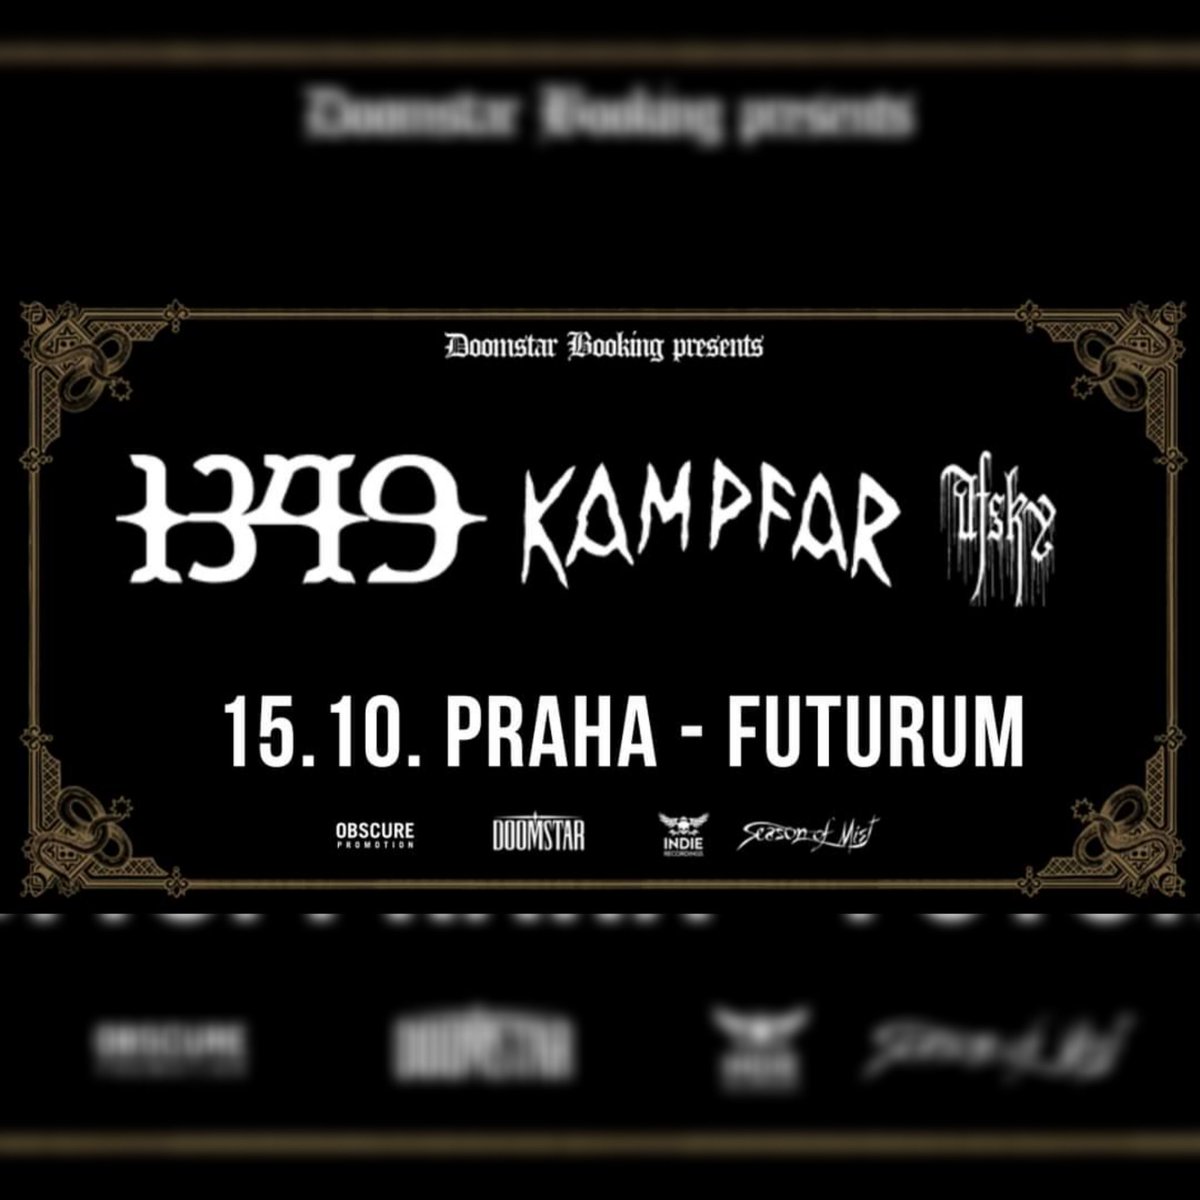 AURAL HELLFIRE ARRIVES IN PRAGUE ON OCTOBER 15TH. @1349official and @Norsepagans, along with @afskyofficial, continue their European Tour at the @futurummusicbar on October 15th. Tickets: obscure.cz/cs/tickets/det… DO NOT MISS IT. #legion1349 #auralhellfire #kampfar #afsky